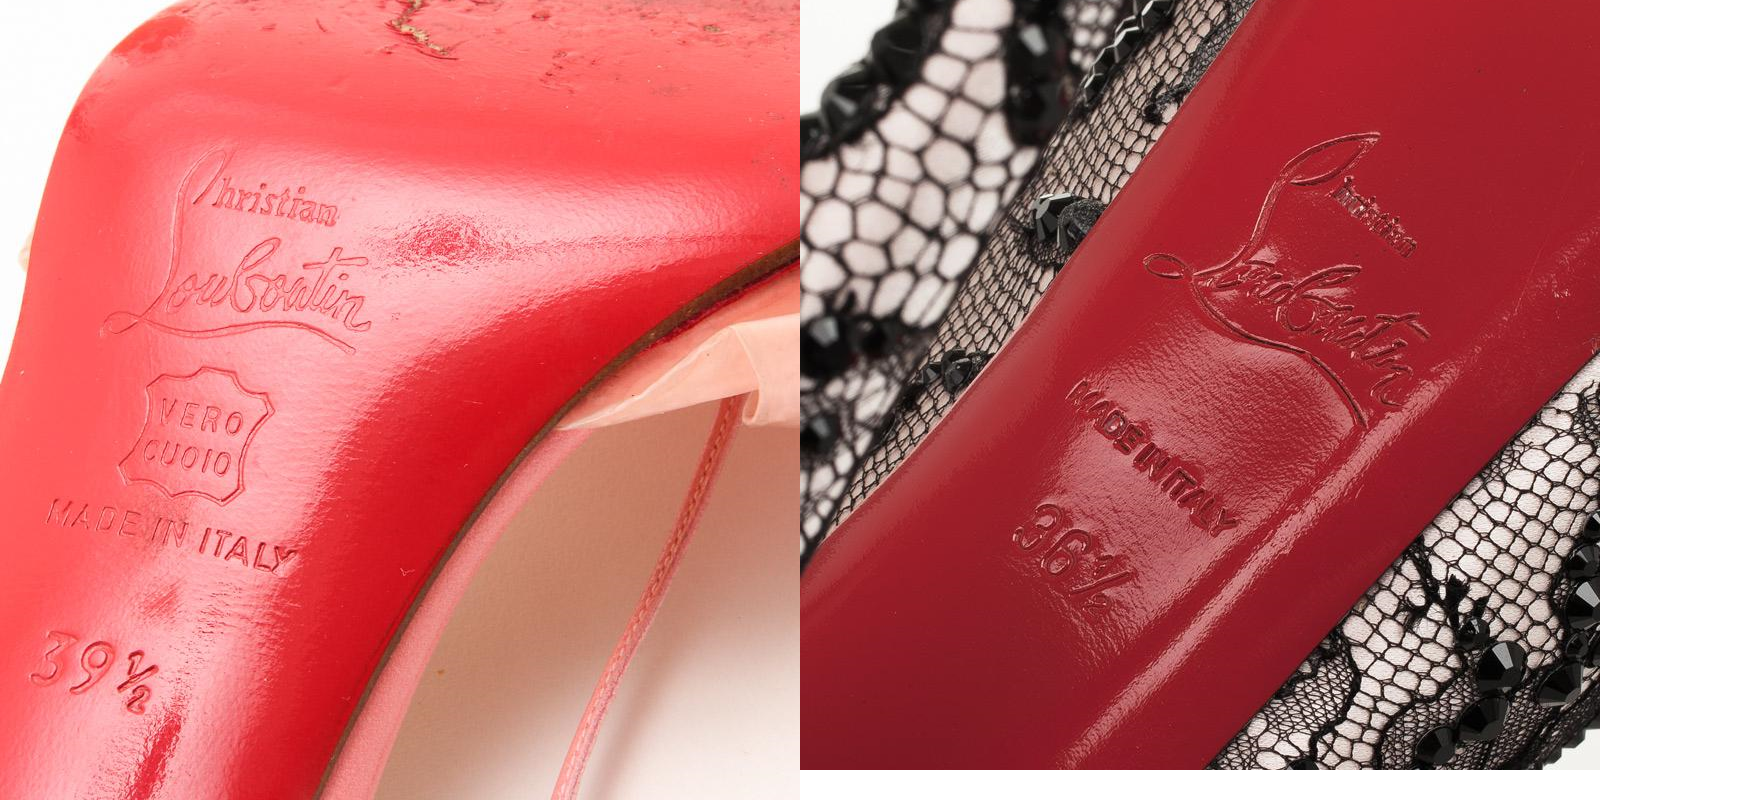 Fake and Authentic Christian Louboutin Soles